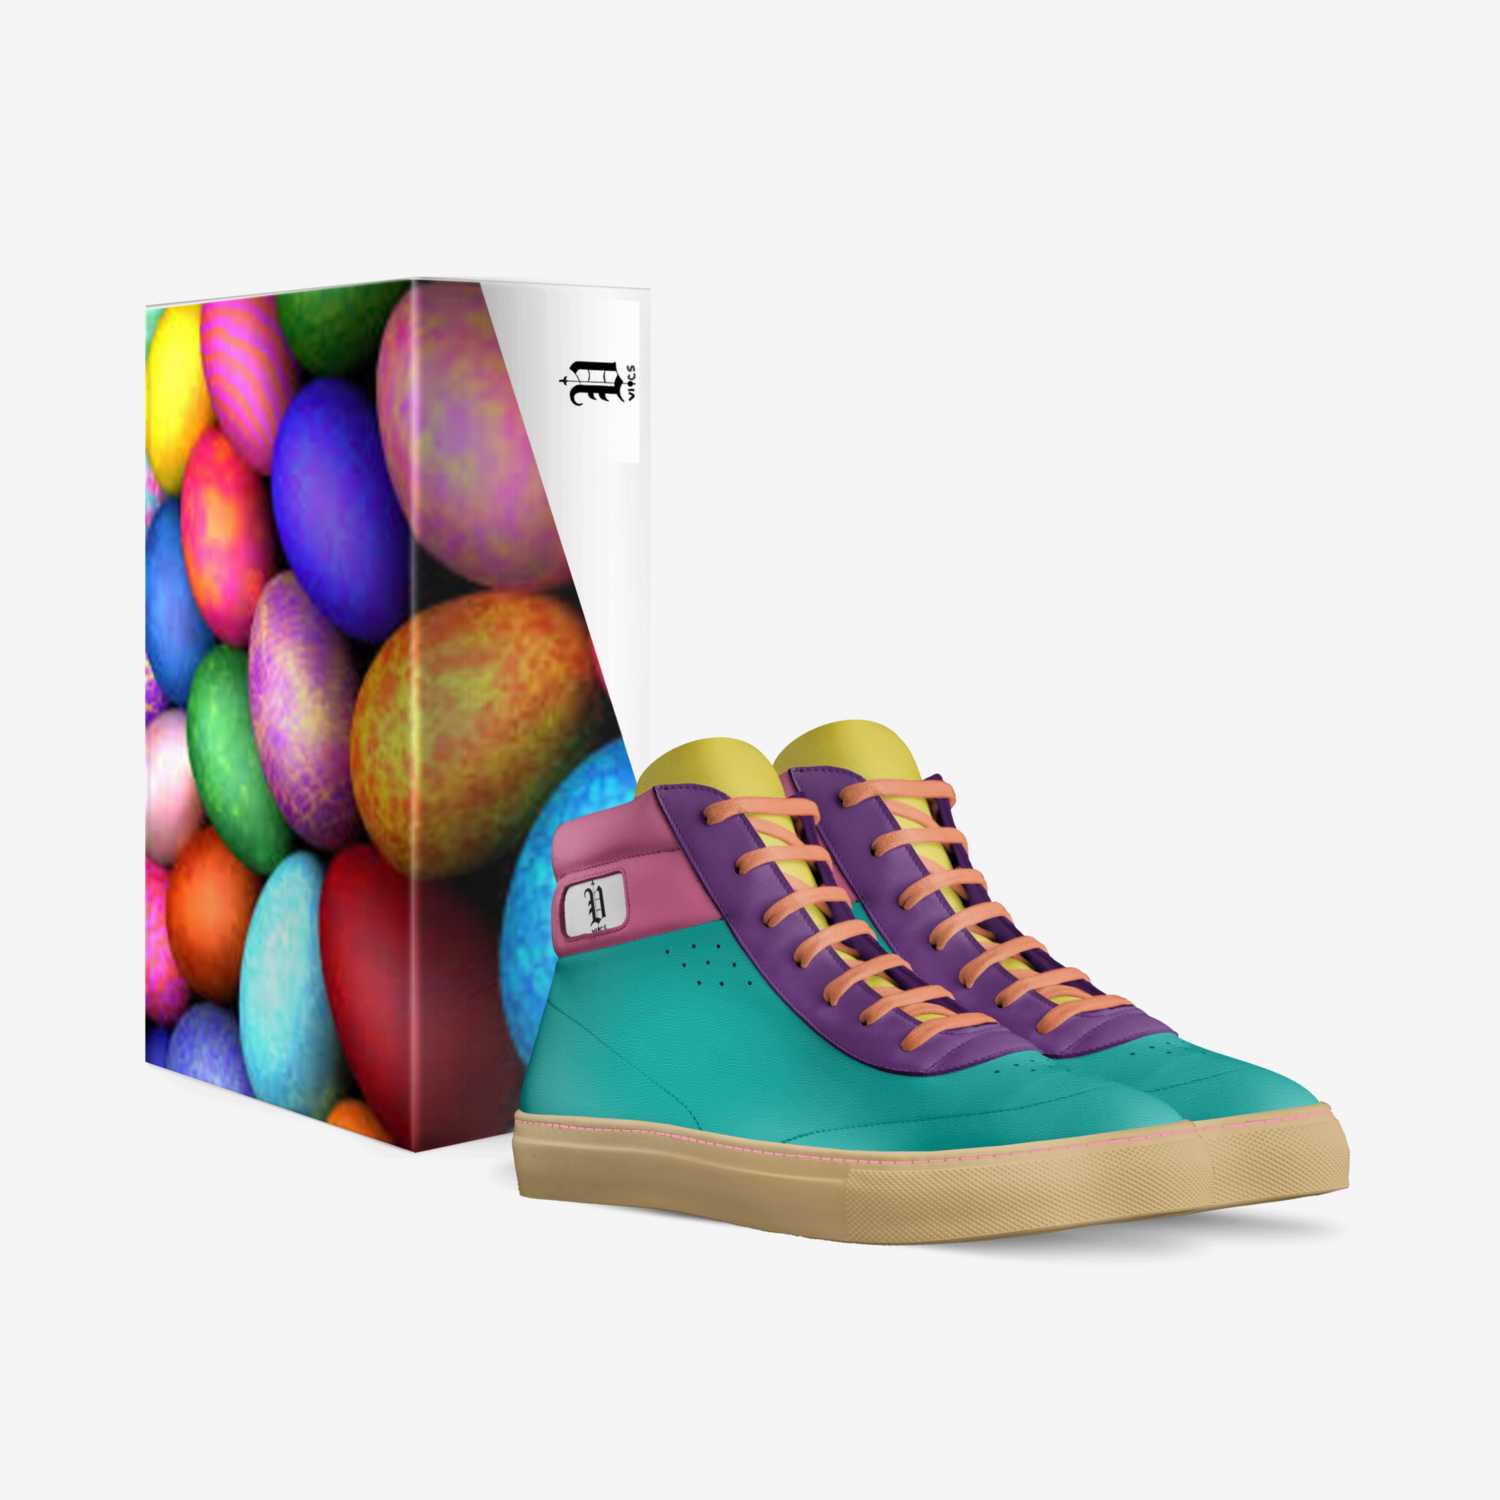 Vics easter custom made in Italy shoes by Brayden Murphy | Box view